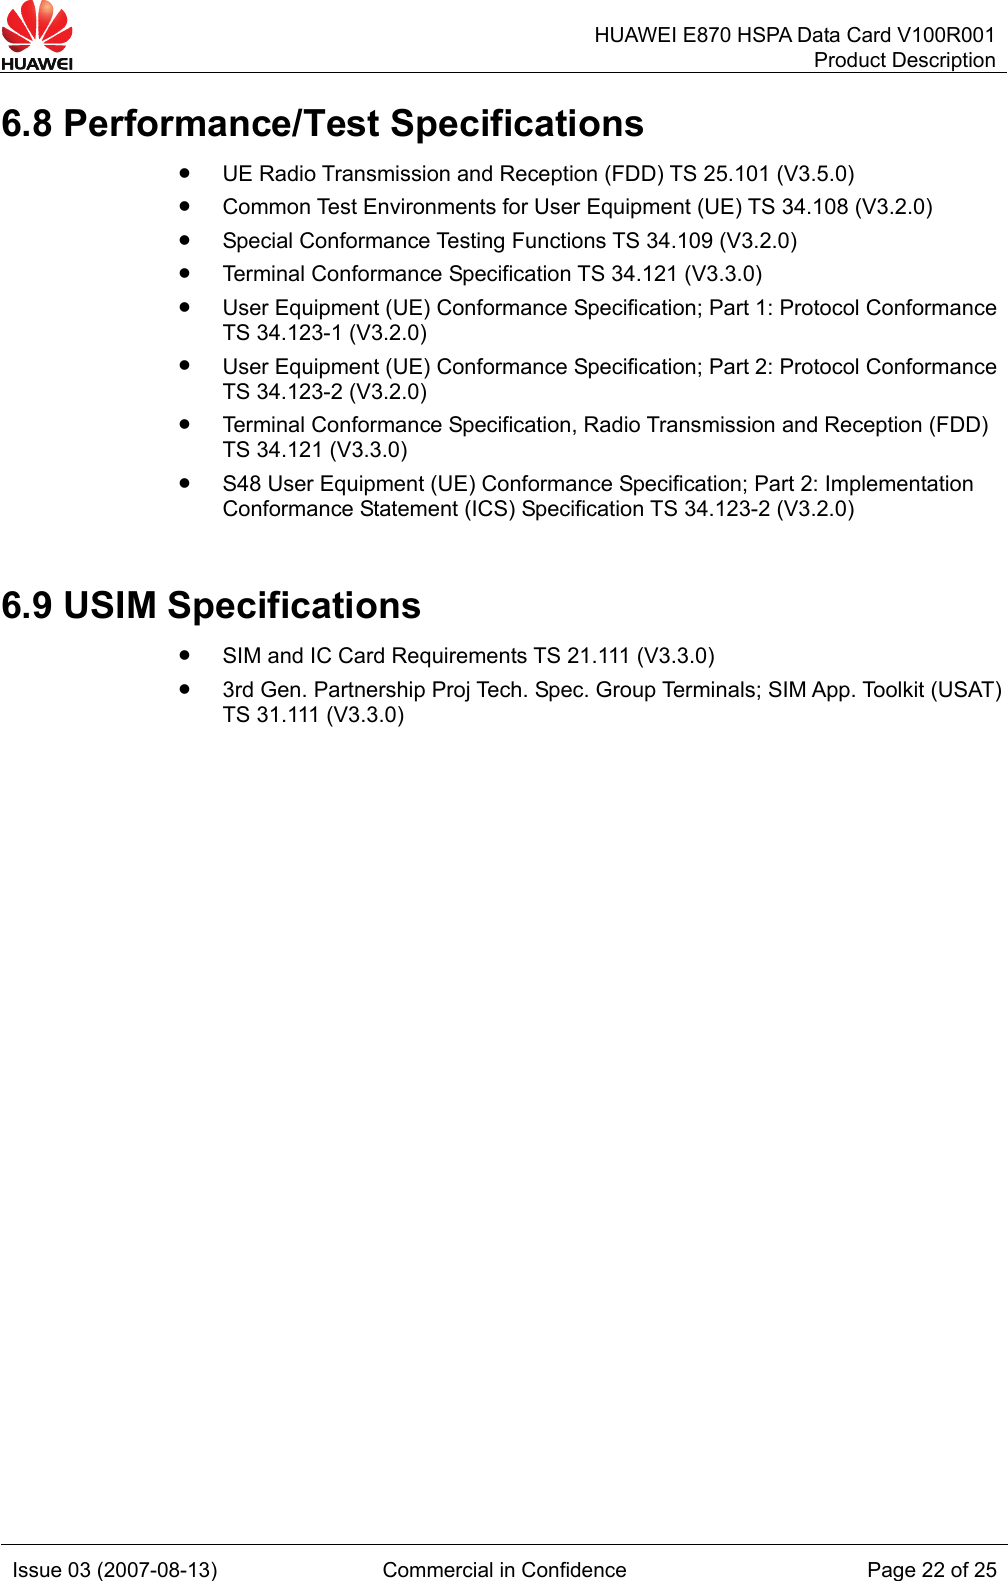   HUAWEI E870 HSPA Data Card V100R001Product Description Issue 03 (2007-08-13)  Commercial in Confidence  Page 22 of 25 6.8 Performance/Test Specifications z UE Radio Transmission and Reception (FDD) TS 25.101 (V3.5.0) z Common Test Environments for User Equipment (UE) TS 34.108 (V3.2.0) z Special Conformance Testing Functions TS 34.109 (V3.2.0) z Terminal Conformance Specification TS 34.121 (V3.3.0) z User Equipment (UE) Conformance Specification; Part 1: Protocol Conformance TS 34.123-1 (V3.2.0) z User Equipment (UE) Conformance Specification; Part 2: Protocol Conformance TS 34.123-2 (V3.2.0) z Terminal Conformance Specification, Radio Transmission and Reception (FDD) TS 34.121 (V3.3.0) z S48 User Equipment (UE) Conformance Specification; Part 2: Implementation Conformance Statement (ICS) Specification TS 34.123-2 (V3.2.0) 6.9 USIM Specifications z SIM and IC Card Requirements TS 21.111 (V3.3.0) z 3rd Gen. Partnership Proj Tech. Spec. Group Terminals; SIM App. Toolkit (USAT) TS 31.111 (V3.3.0)  